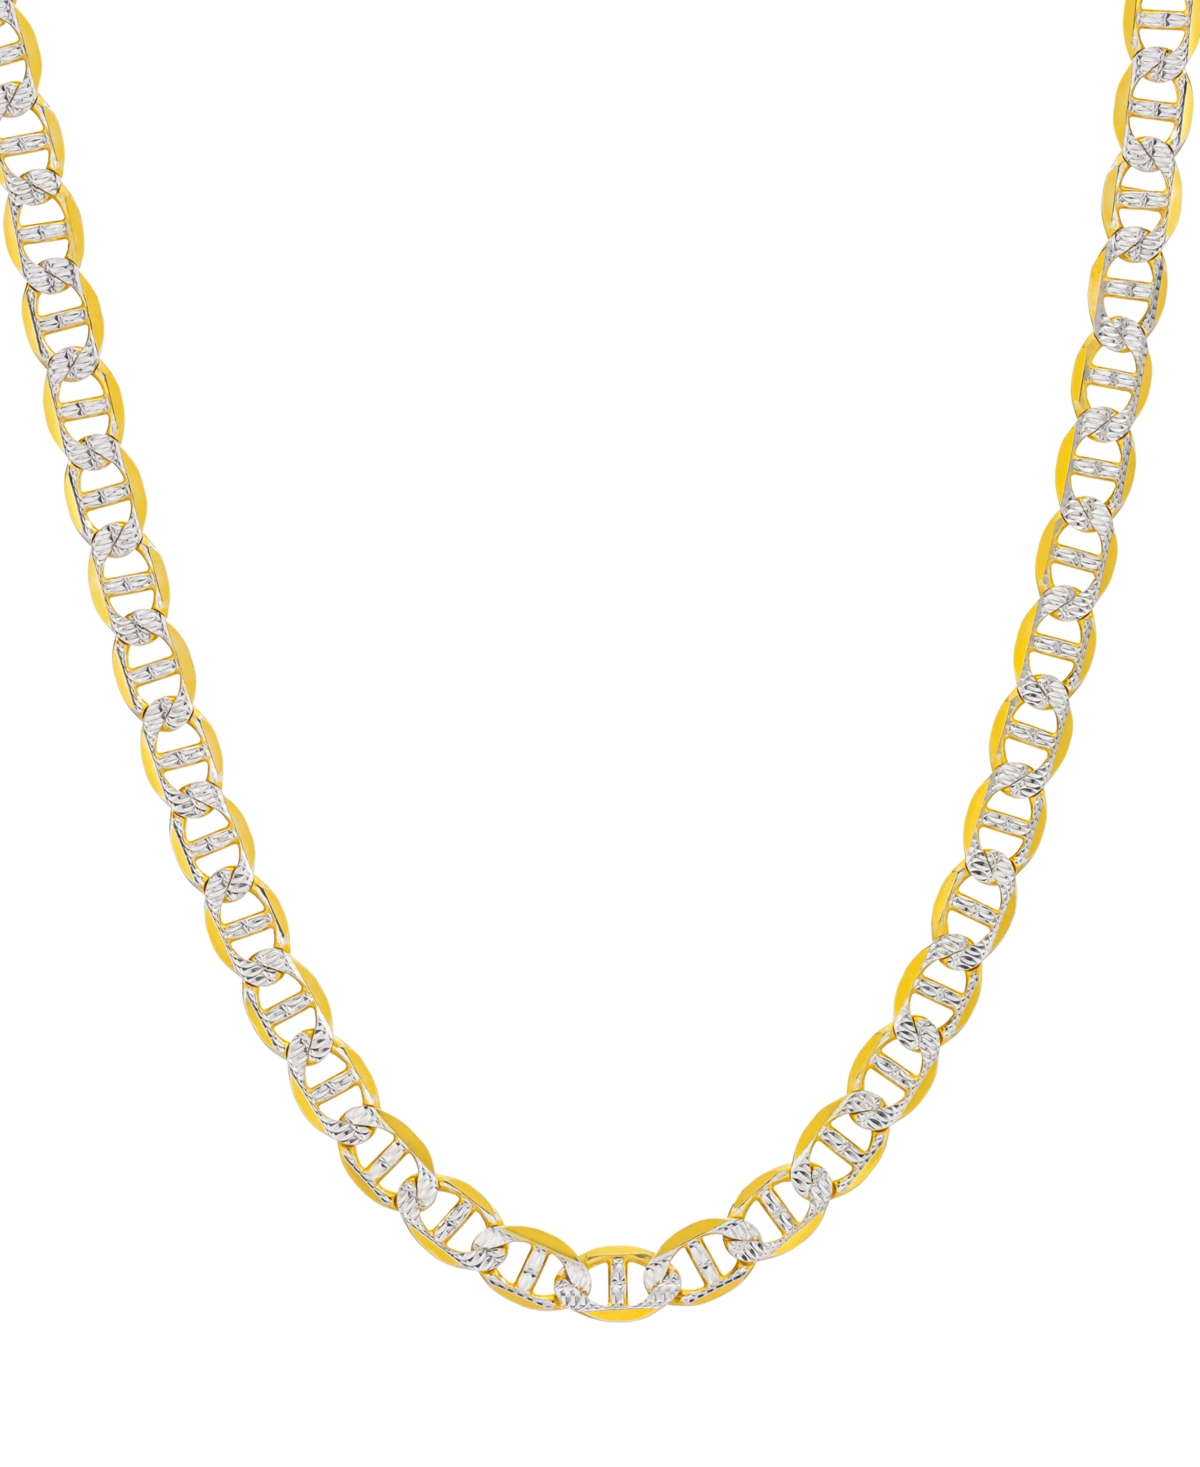 Men's Two-Tone Diamond Cut Mariner Link 24" Chain Necklace in Sterling Silver & 14k Gold-Plate - Two Tone